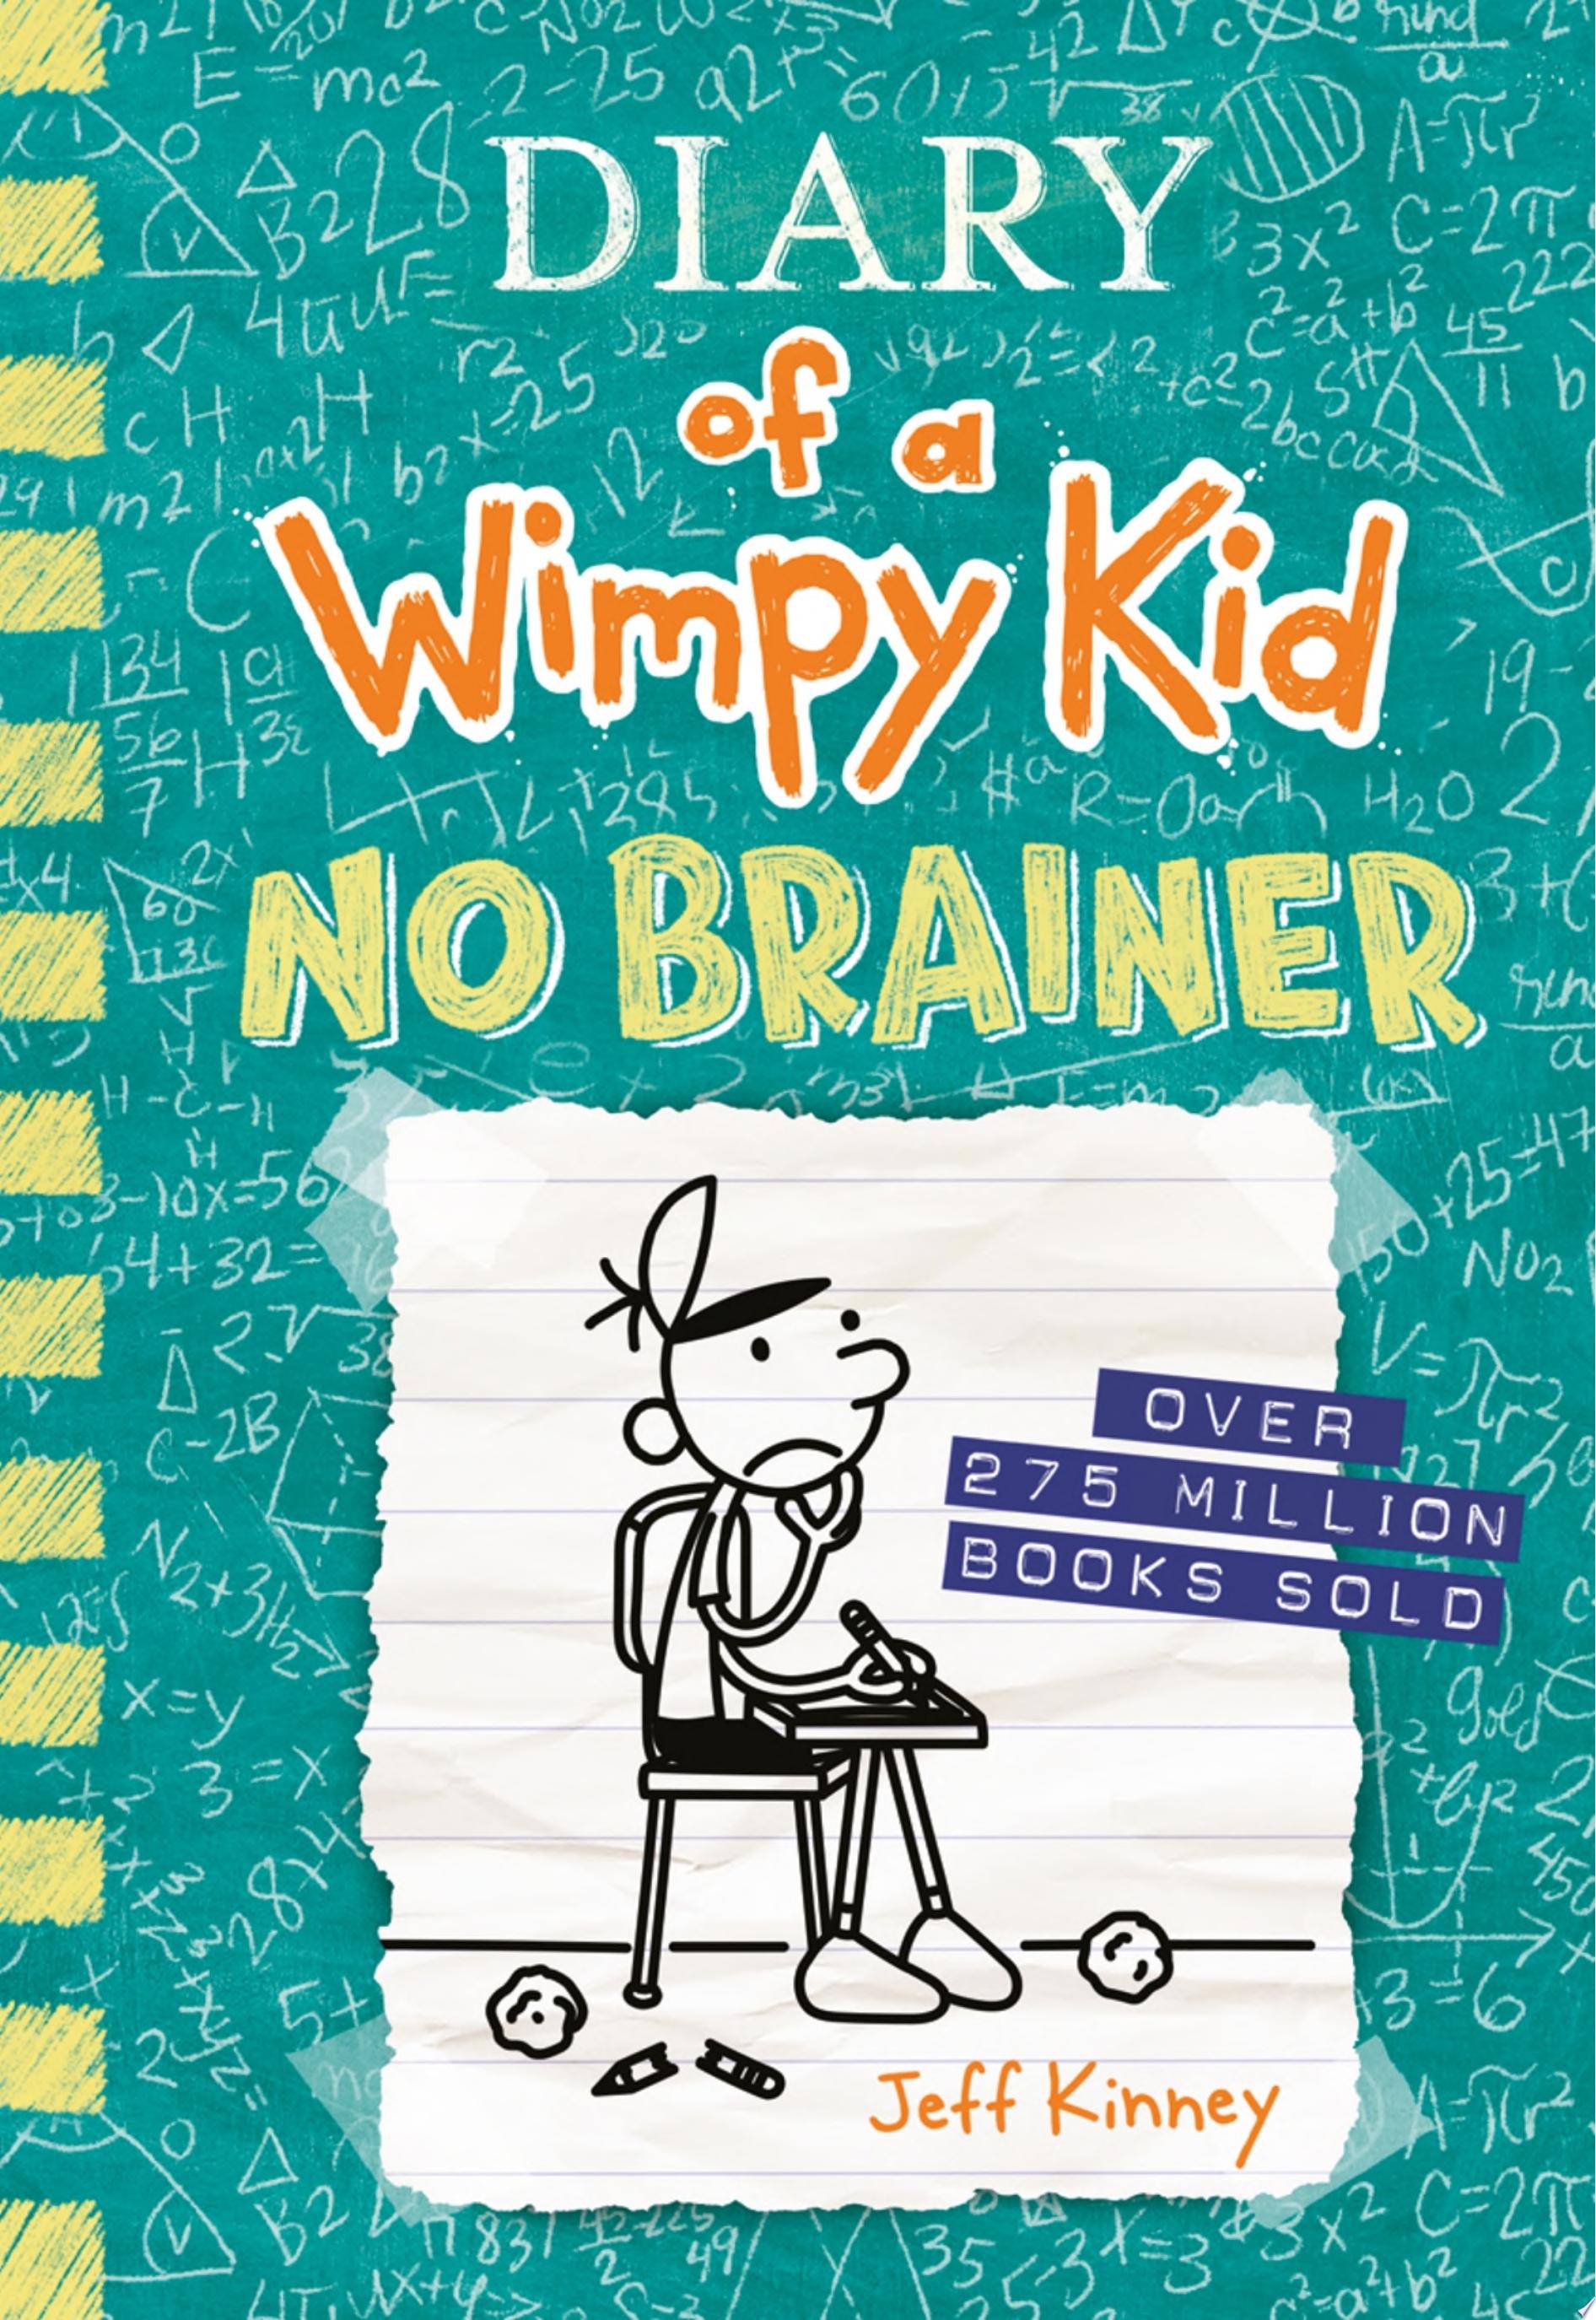 Image for "Diary of a Wimpy Kid #18: No Brainer"